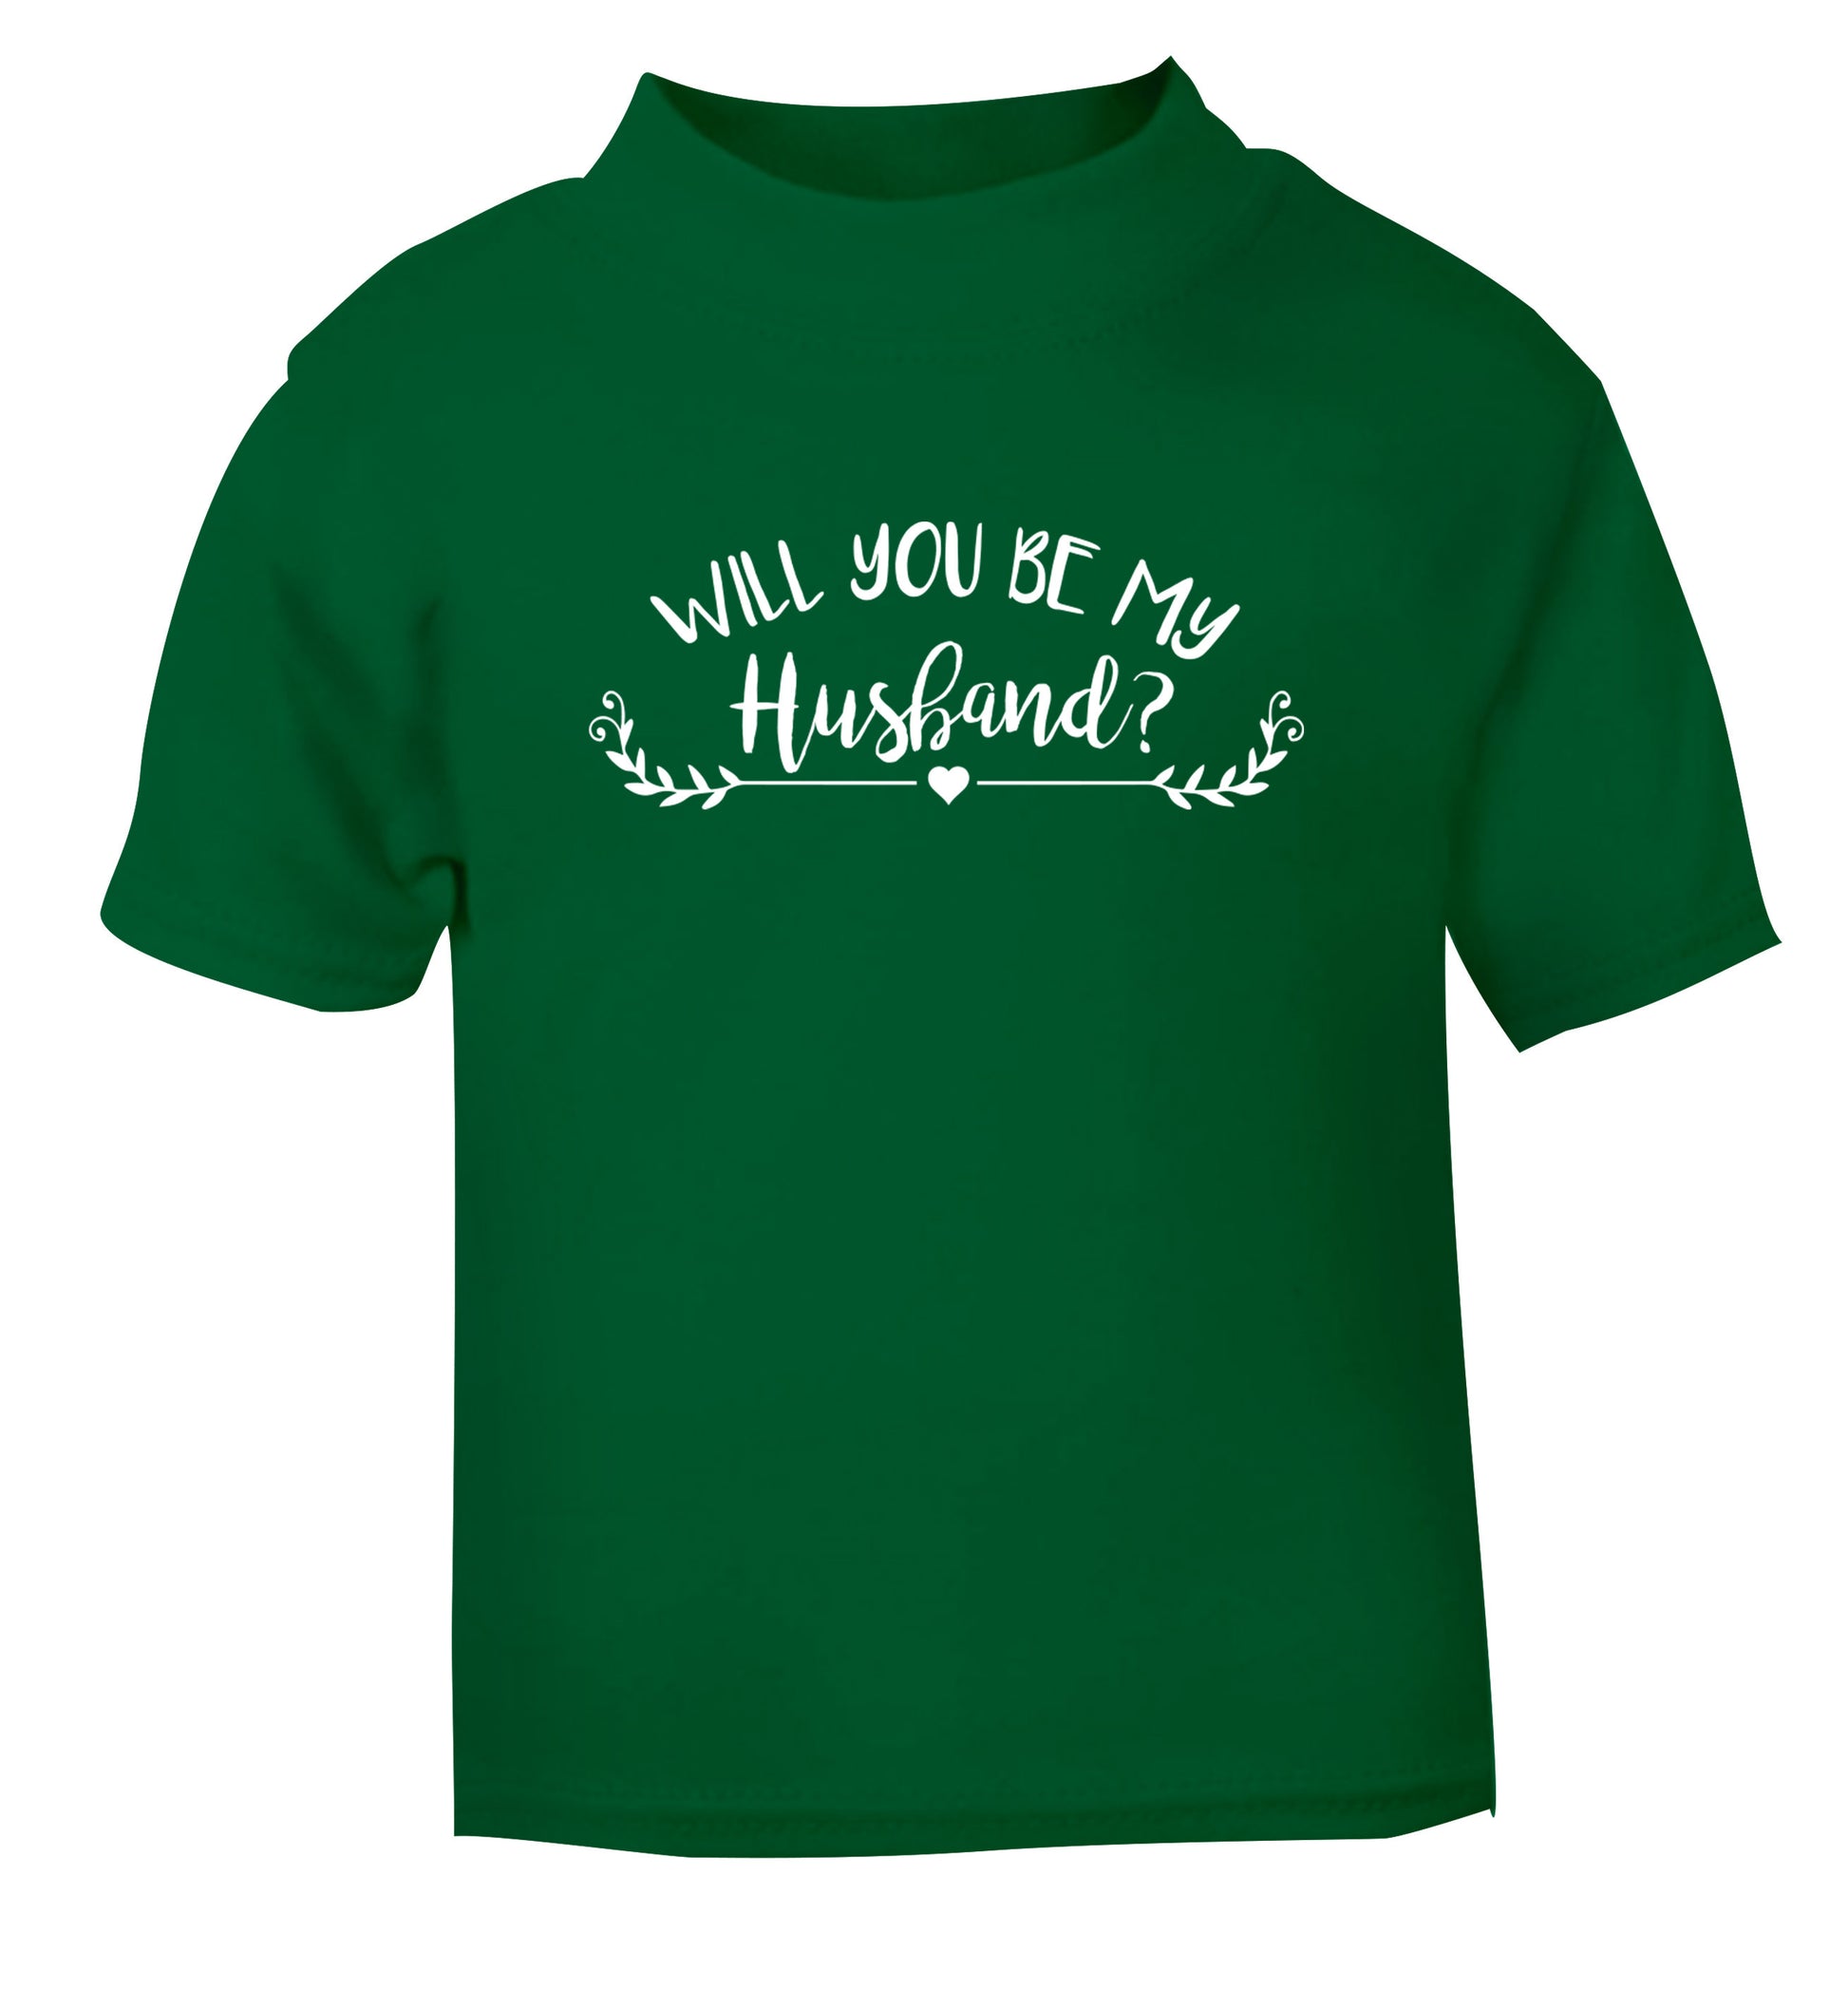 Will you be my husband? green Baby Toddler Tshirt 2 Years